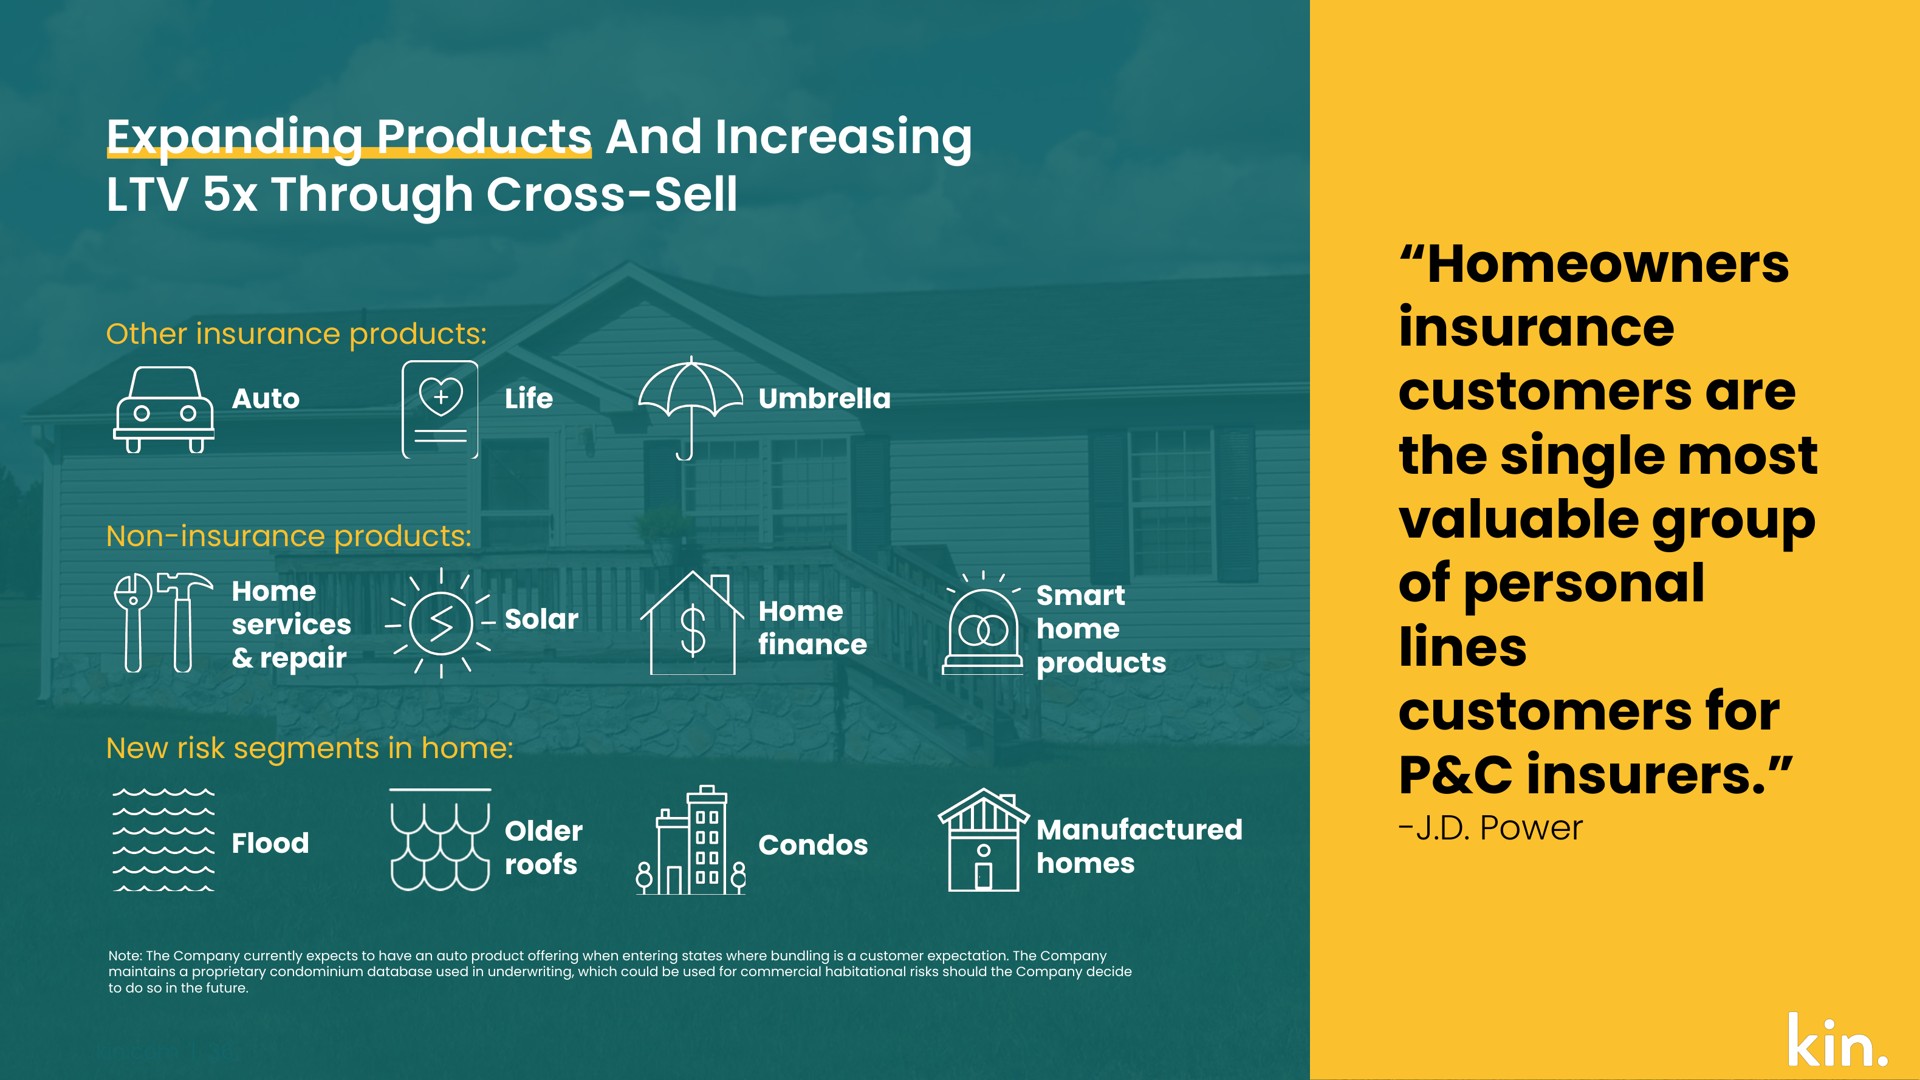 homeowners insurance customers are the single most valuable group of personal lines customers for insurers through cross sell and increasing | Kin